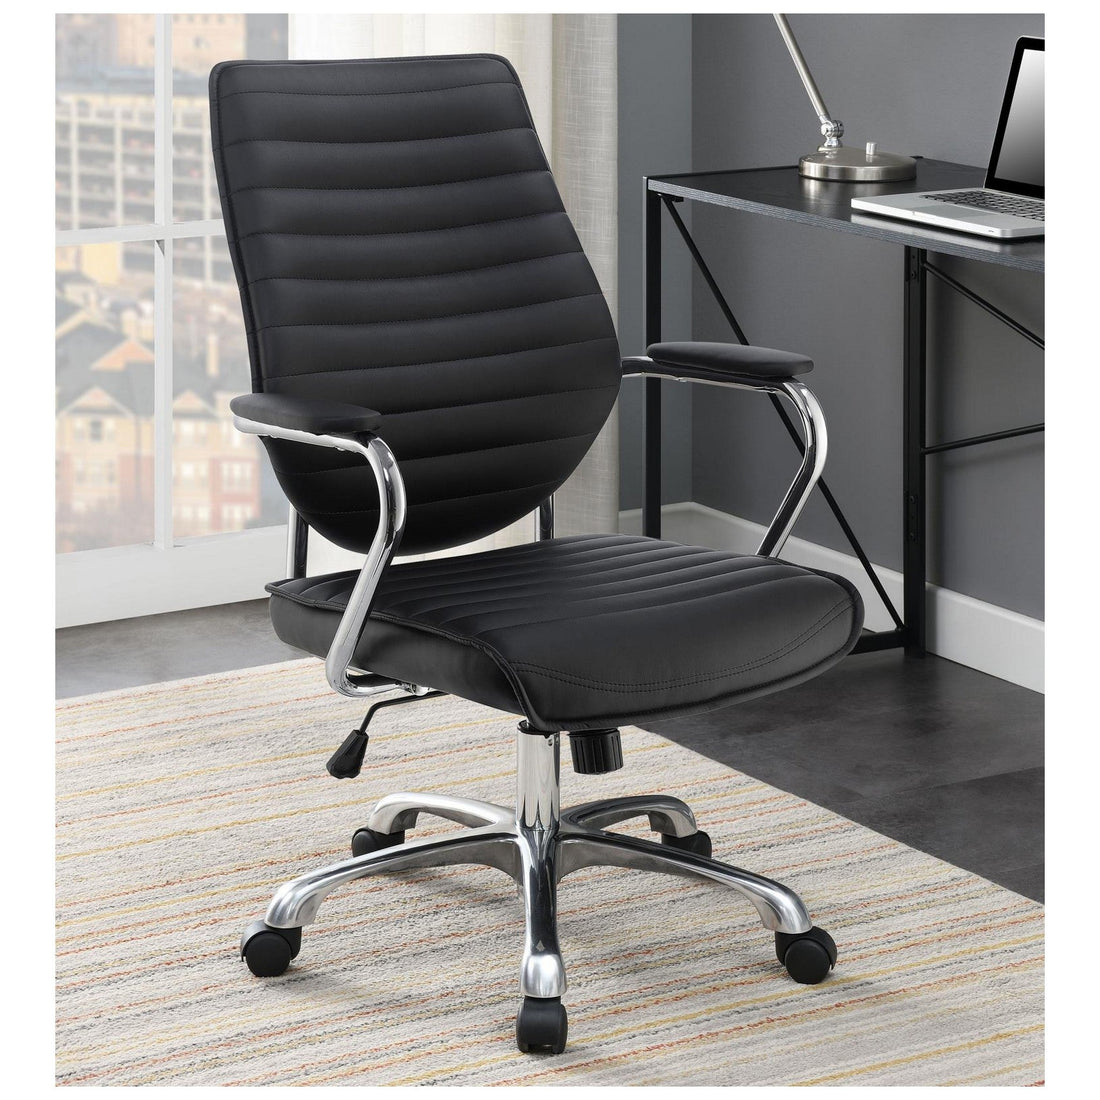 Chase High Back Office Chair Black and Chrome 802269